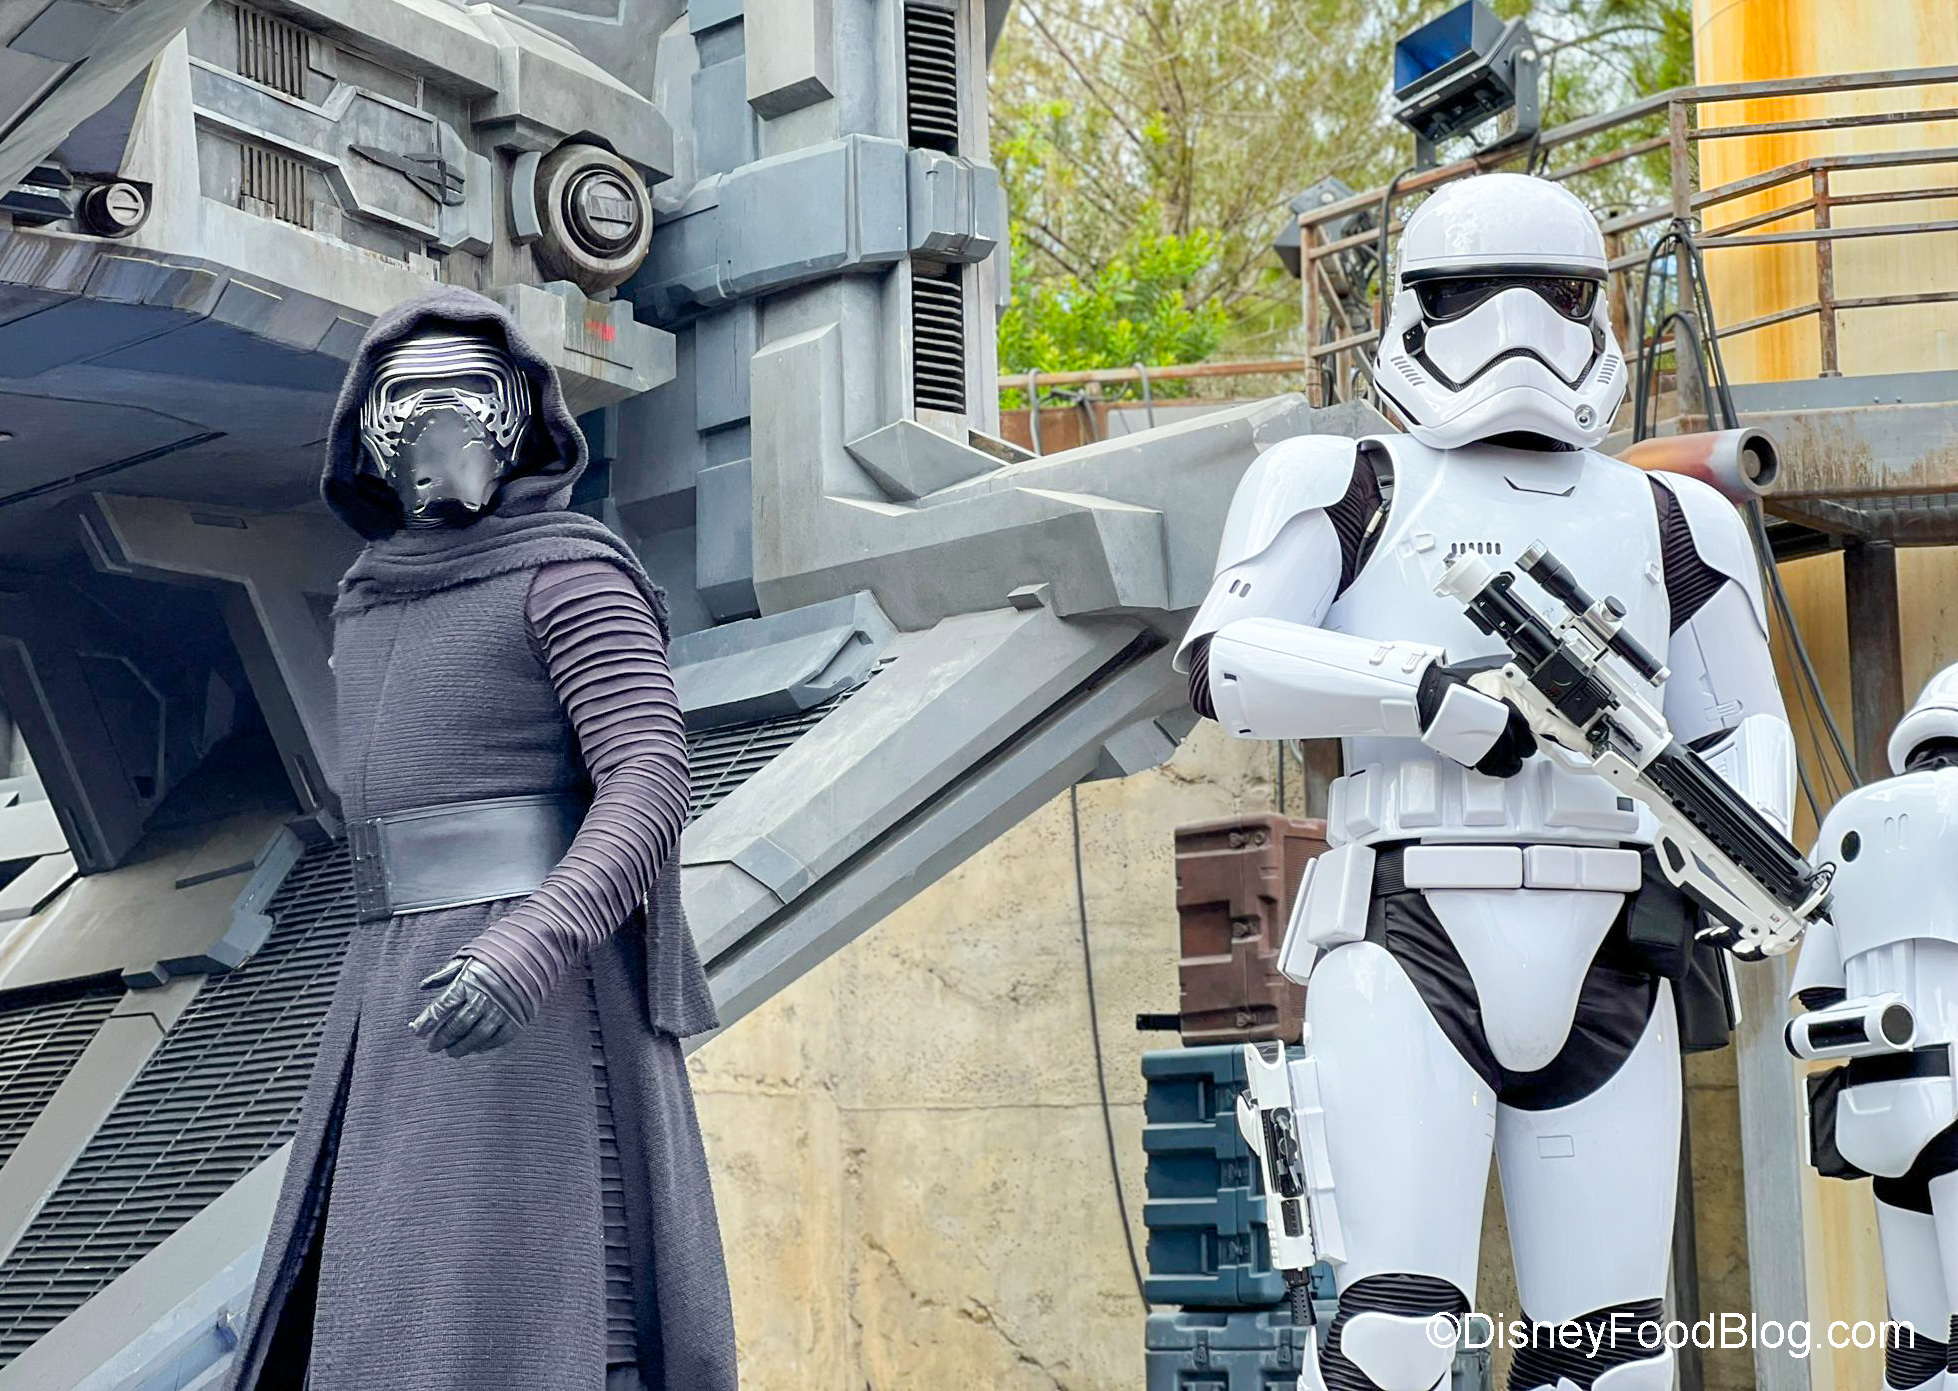 15 Unique Ways to Celebrate May the 4th in Disney World Disney Food